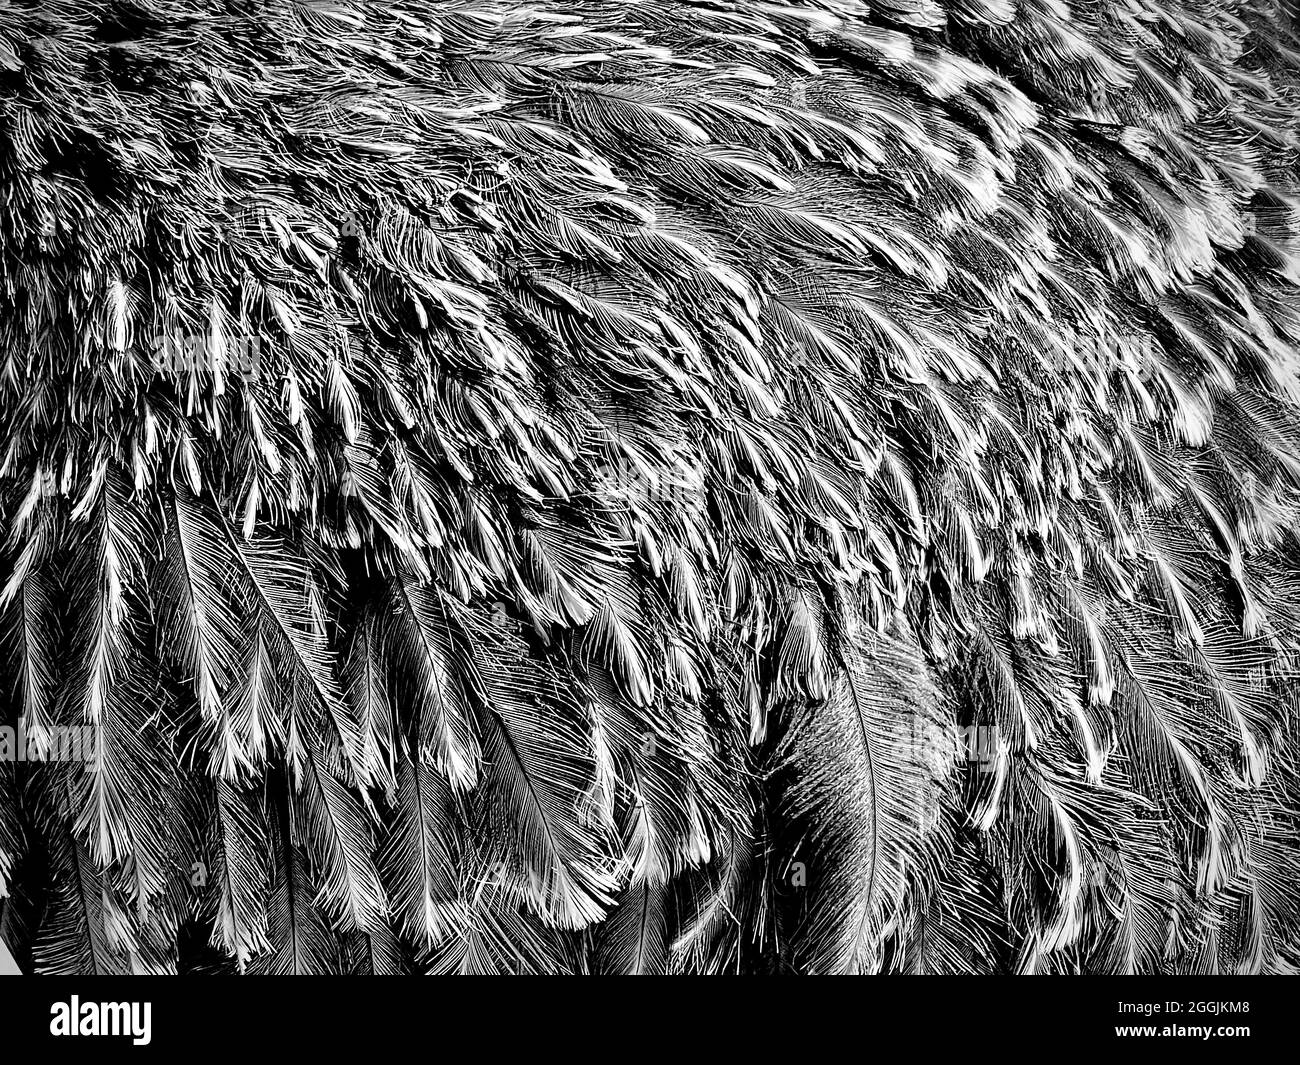 Feathers Black and White Stock Photos & Images - Alamy